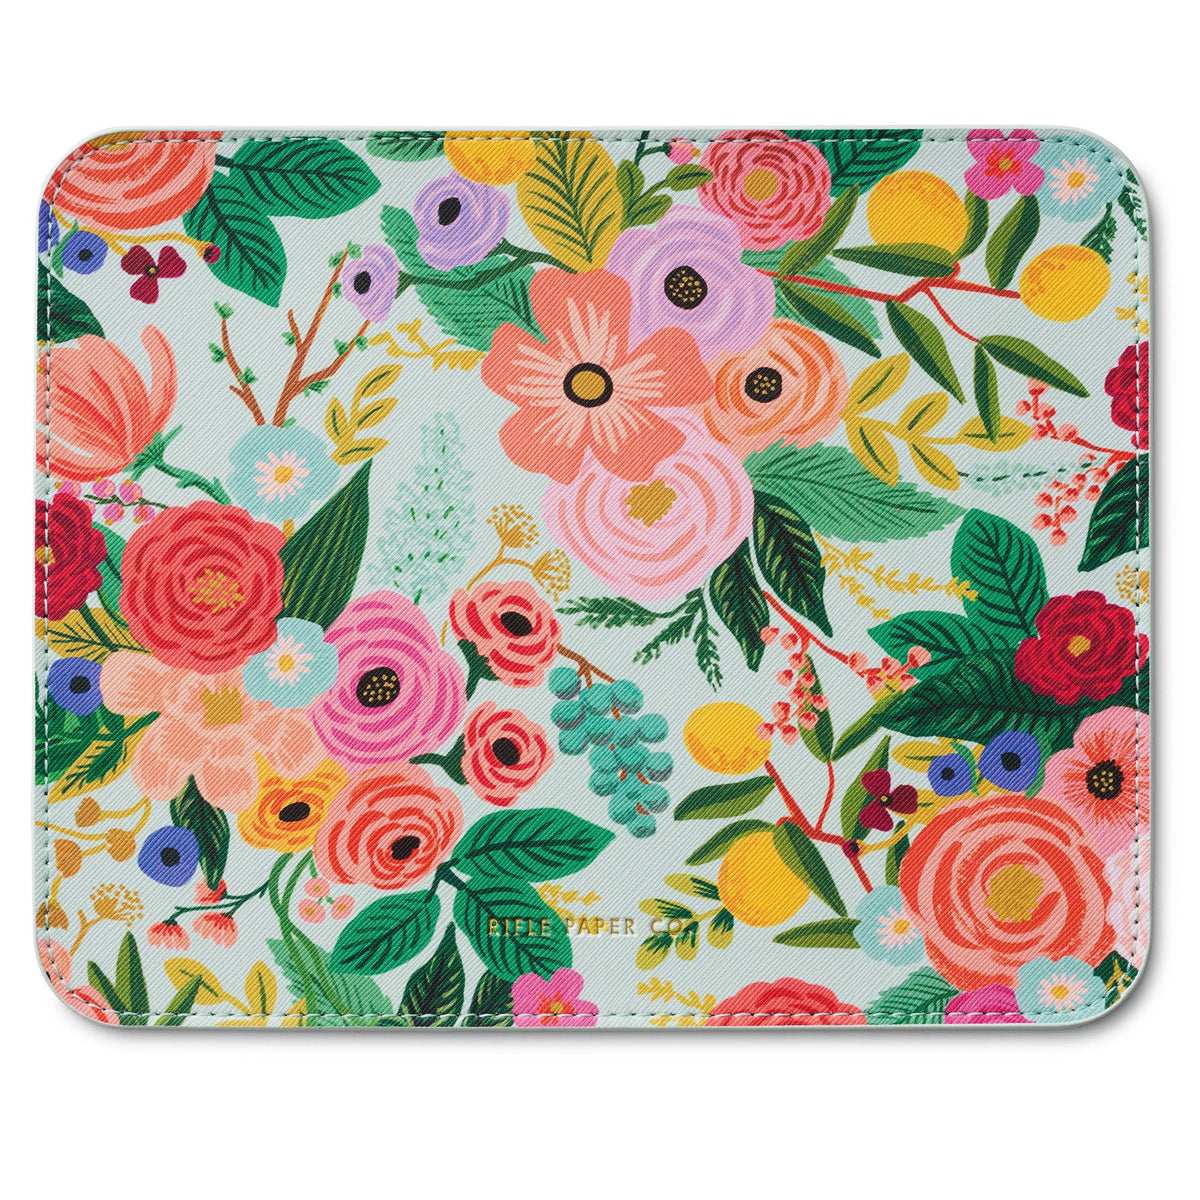 Garden Party Mouse Pad - The Preppy Bunny